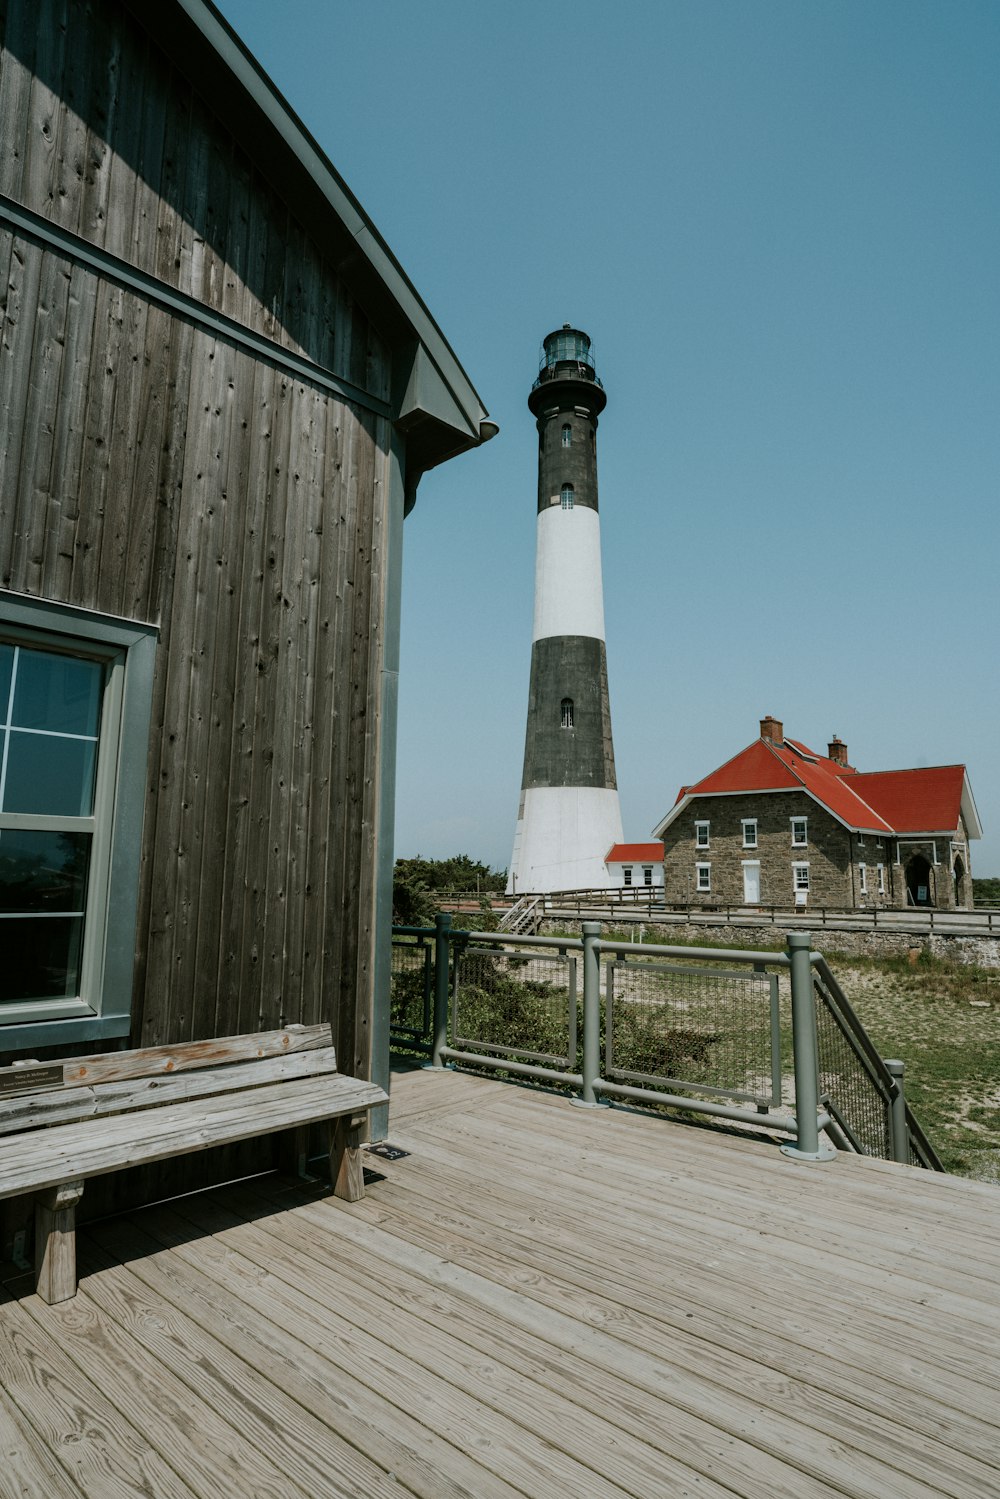 a wooden deck with a bench and a light house in the background